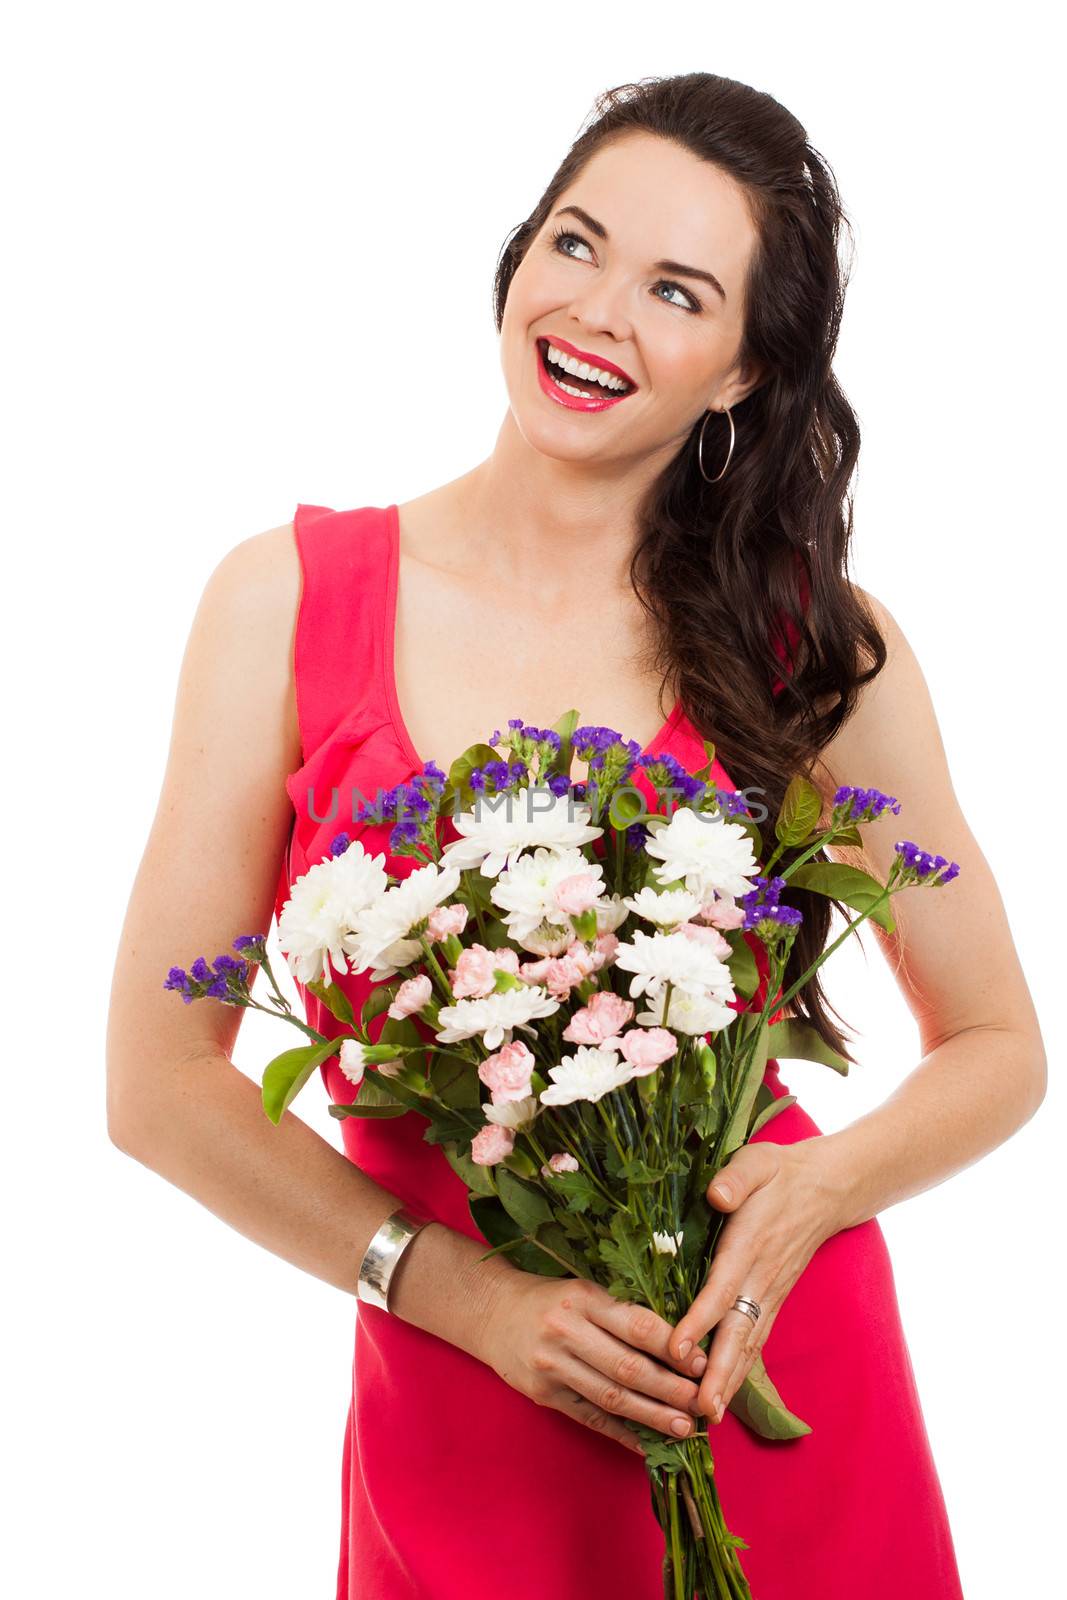 A smiling beautiful woman holding flowers and looking at copy-space. Isolated on white.